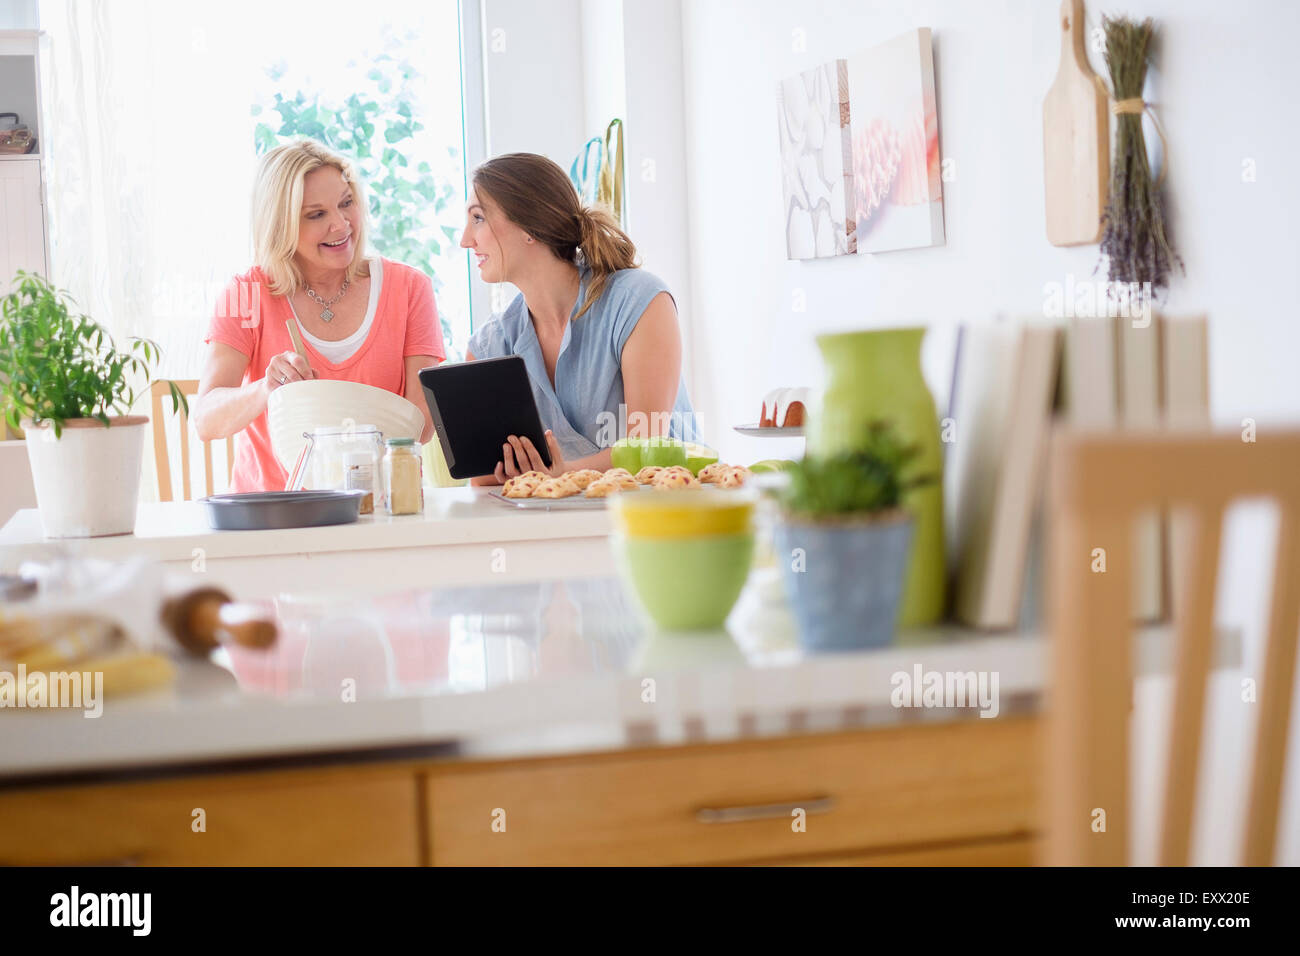 Mother with adult daughter baking in kitchen Stock Photo